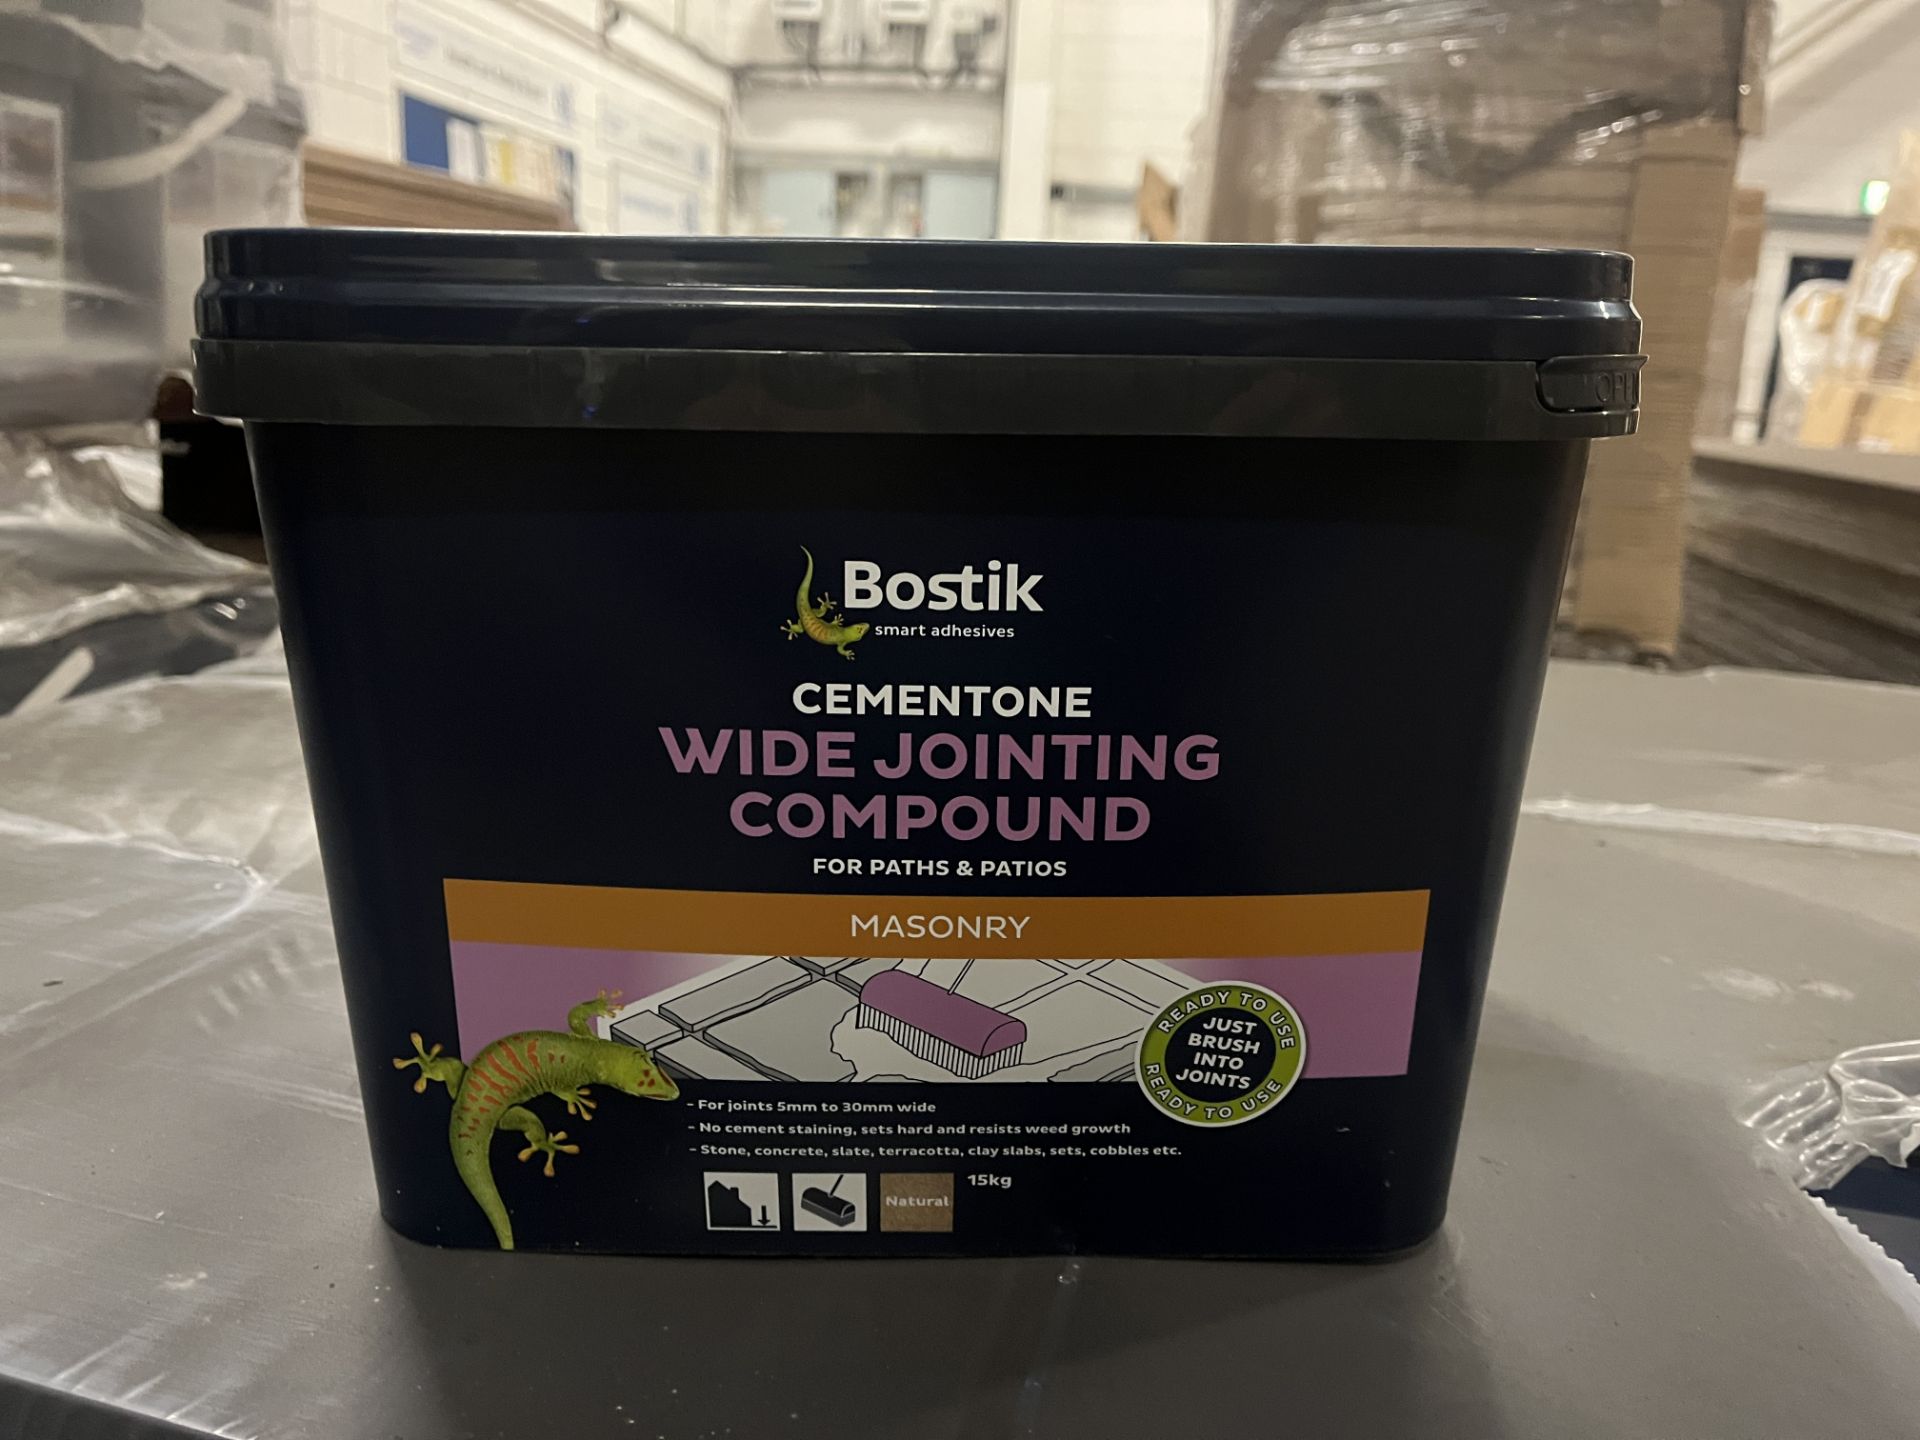 FULL TRUCK TO CONTAIN 1536 X BRAND NEW BOSTIK 15KG CEMETONE WIDE JOINTING COMPOUND FOR PATHS AND